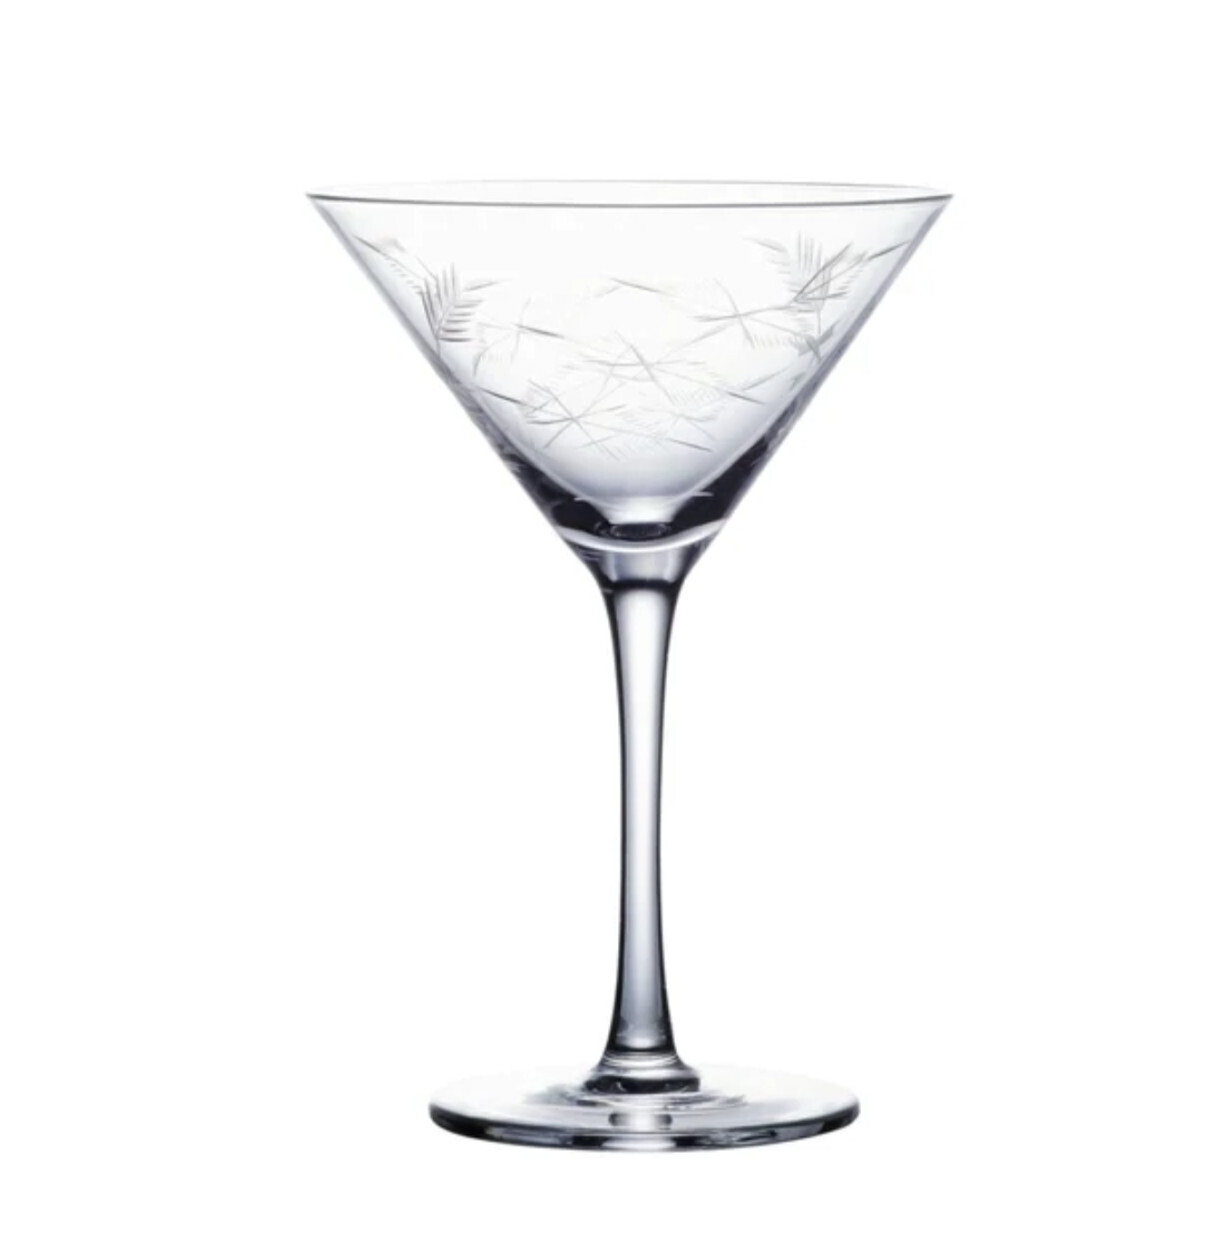 Etched Martini Glasses - Set of 2